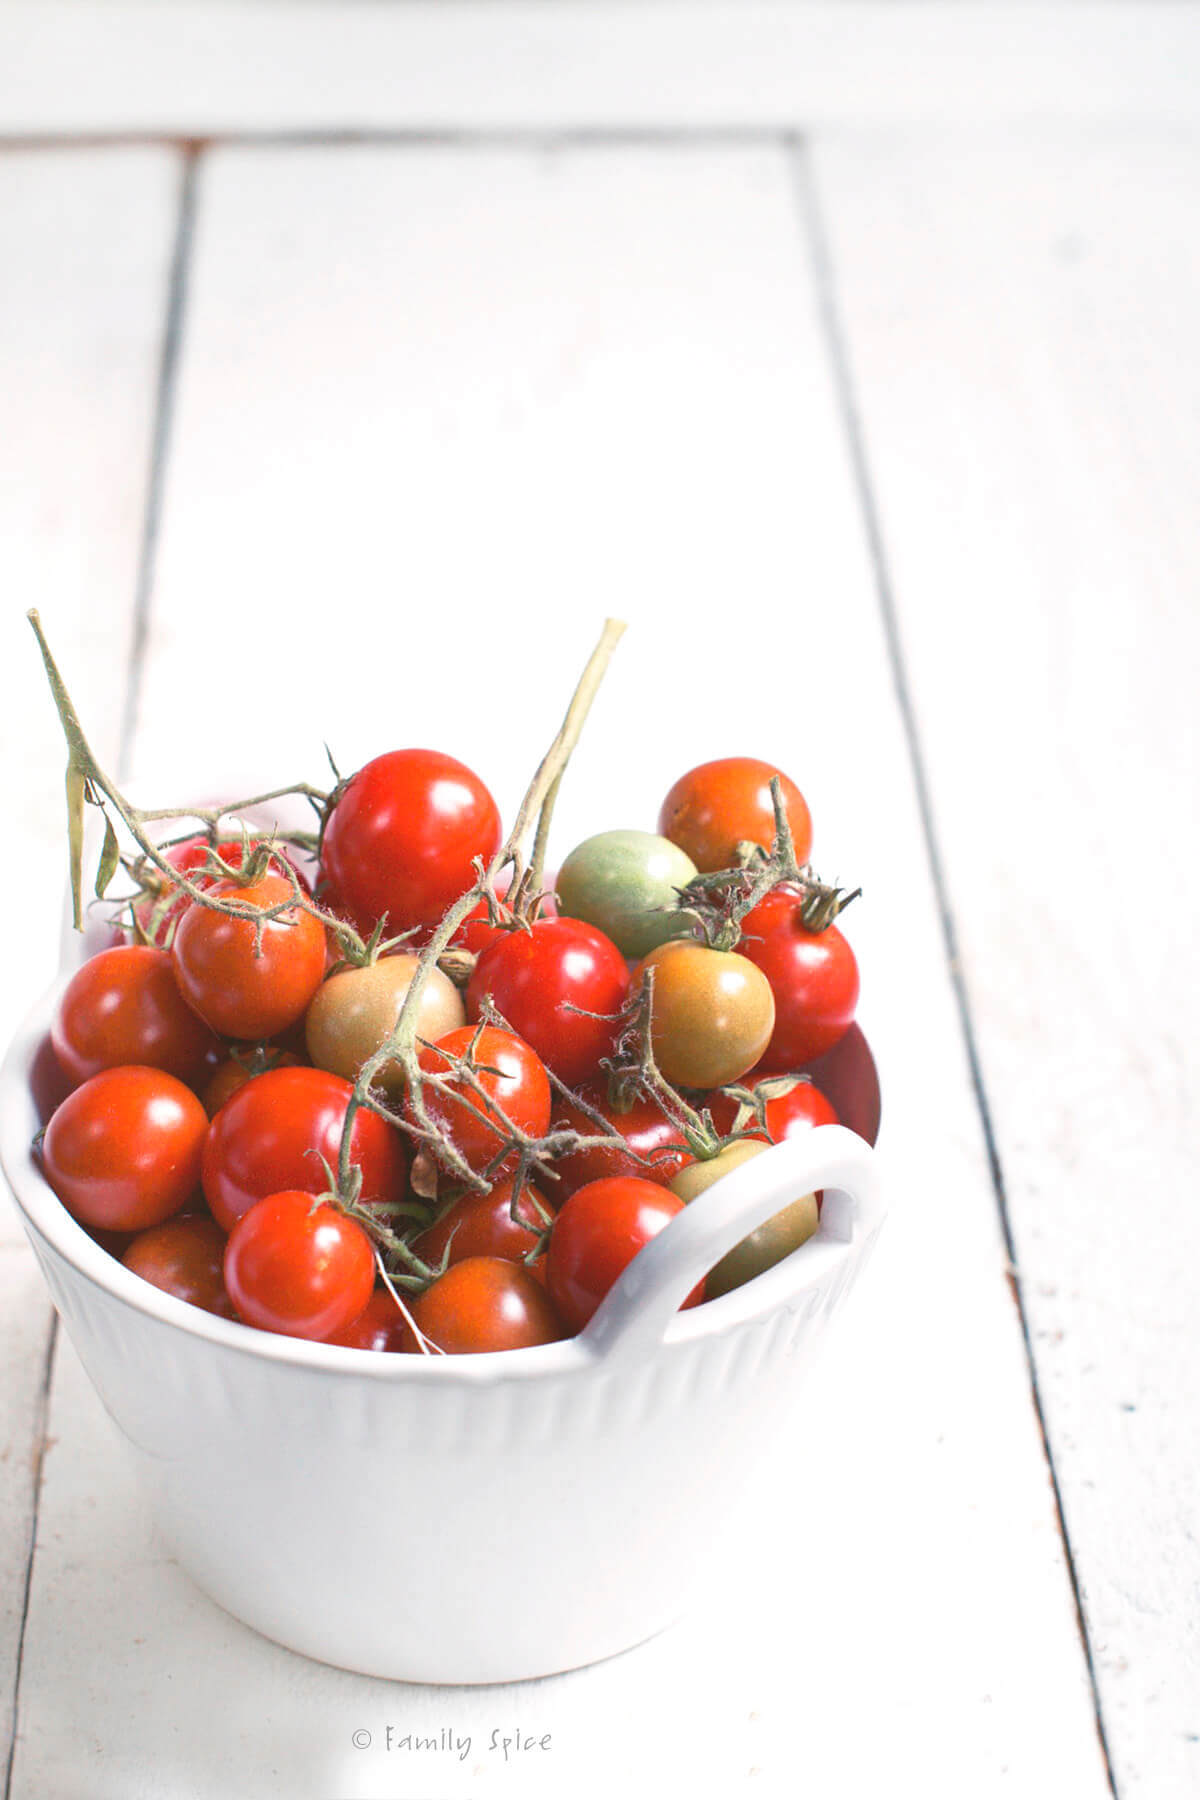 Cherry tomatoes in a white bowl on a white background